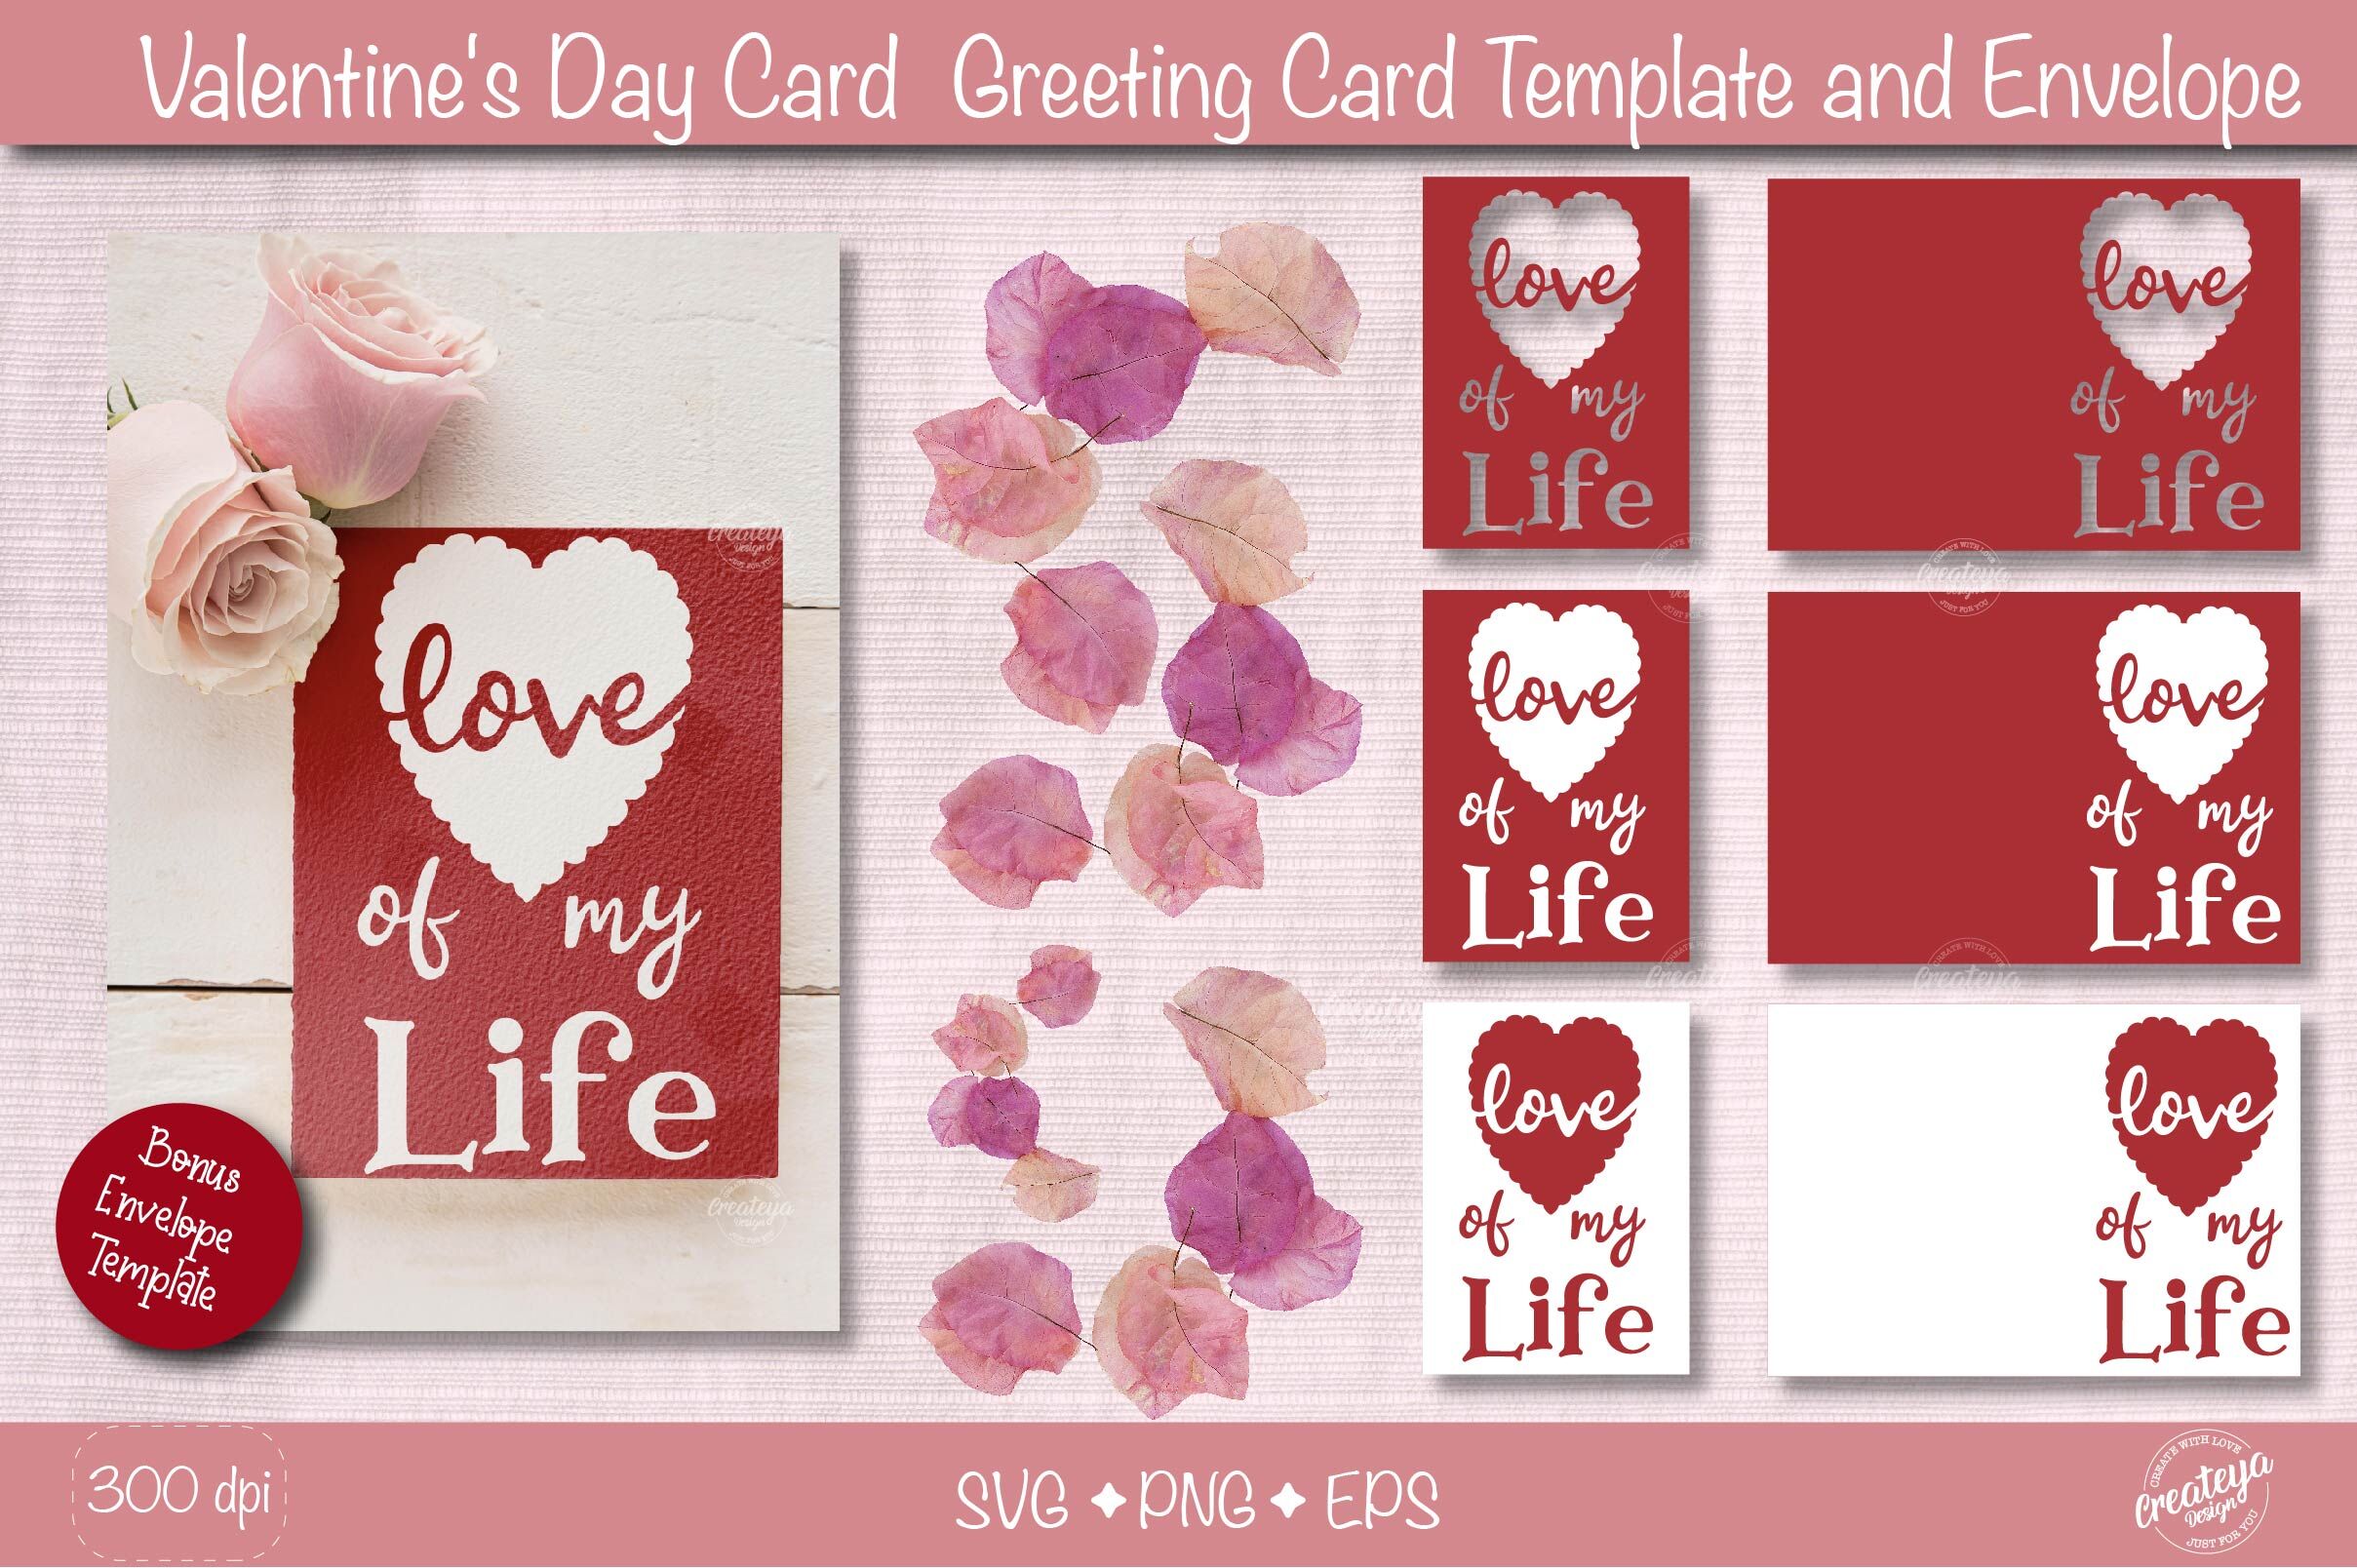 Printable Cards - Heart Greeting Card Template